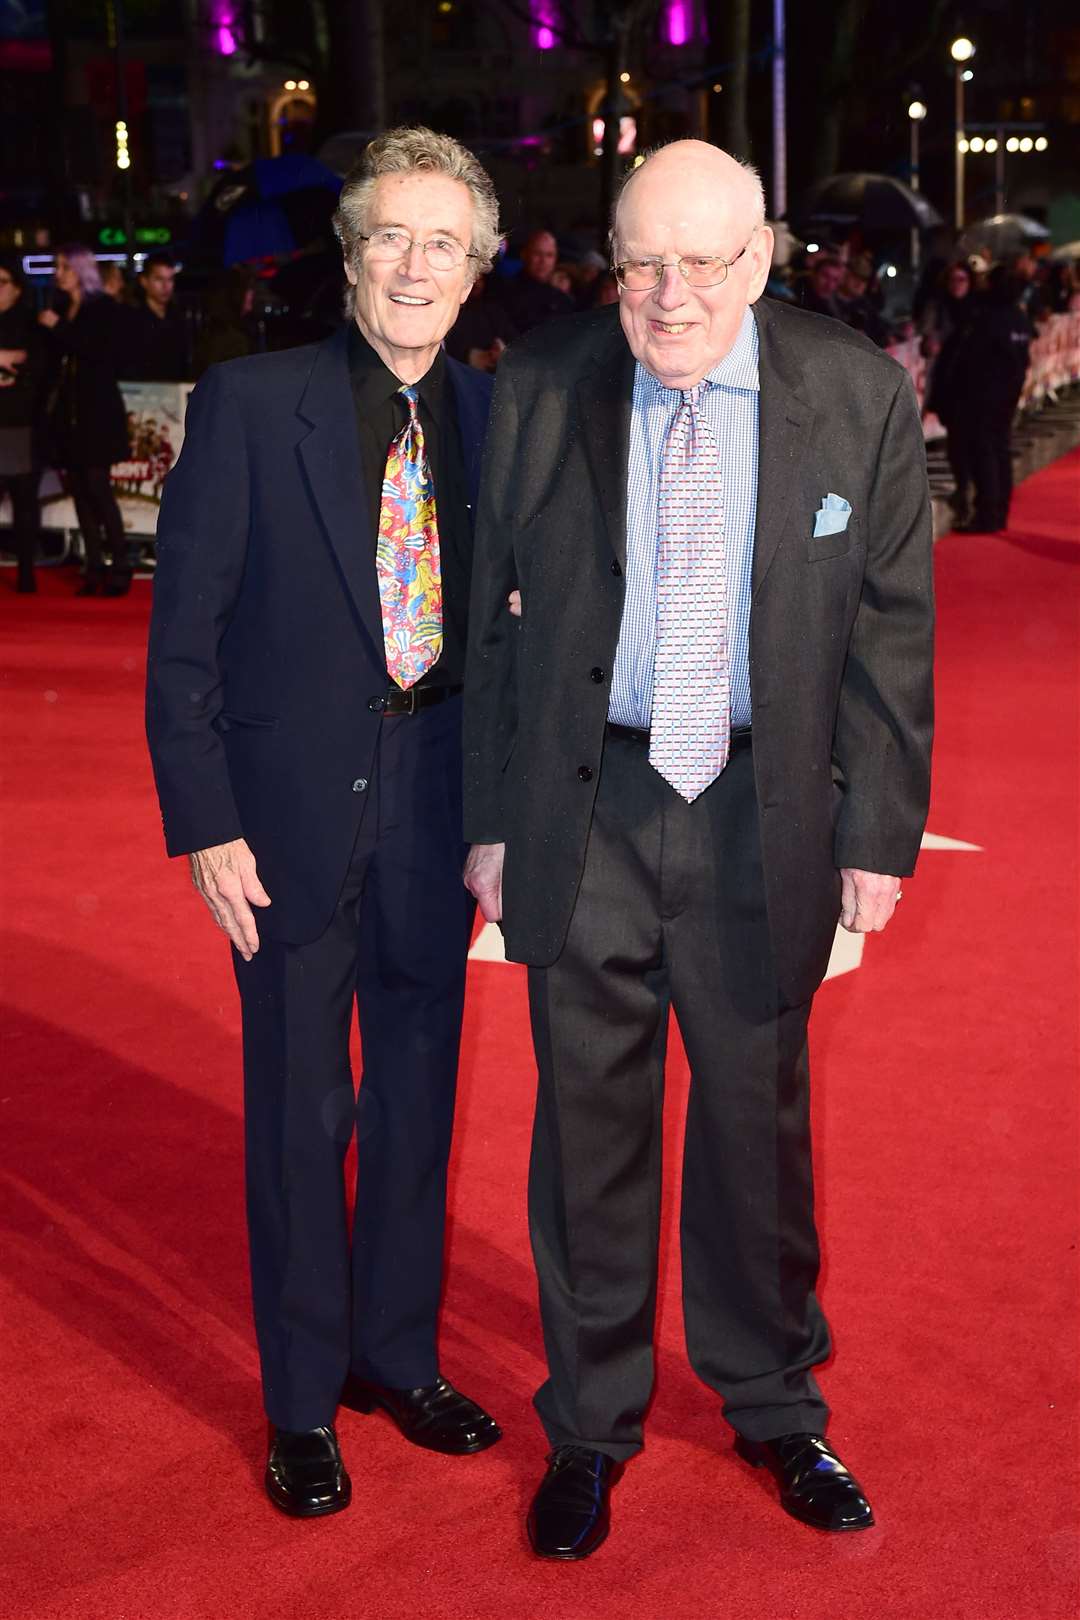 Frank Williams (right) attends the world premiere of Dad’s Army at the Odeon Leicester Square in 2016 (Ian West/PA)